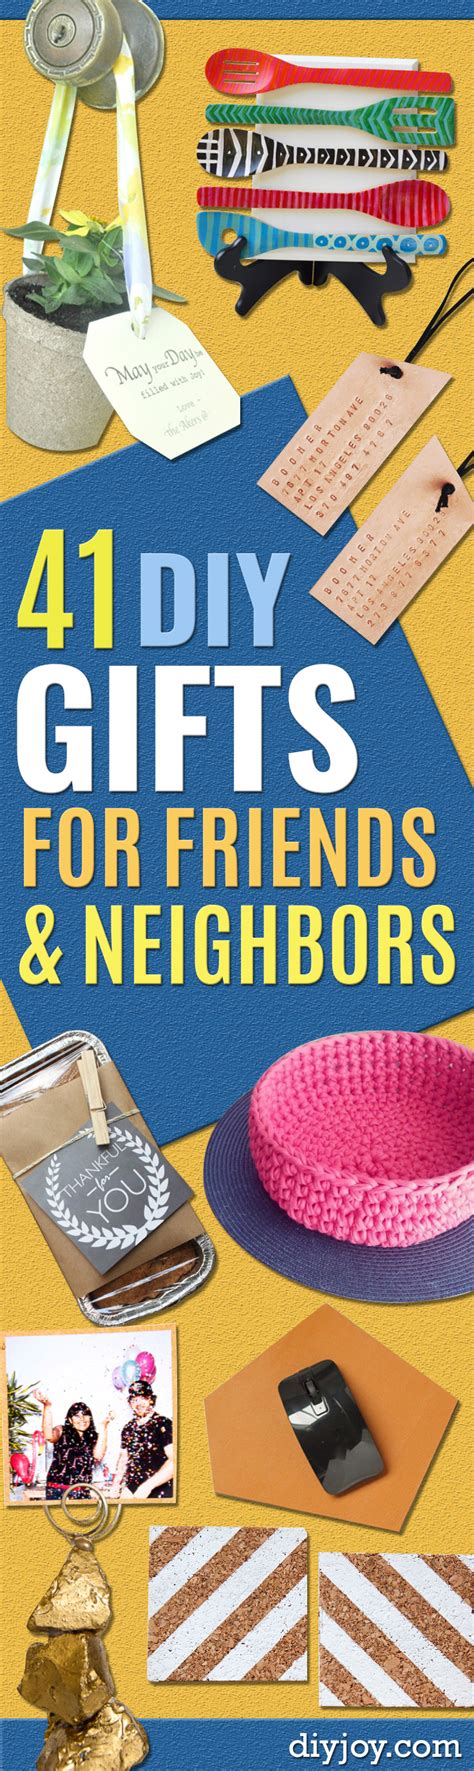 Whether outside lighting the fire or out with friends your guy will be ready to light you up. 41 Best Gifts To Make for Friends and Neighbors